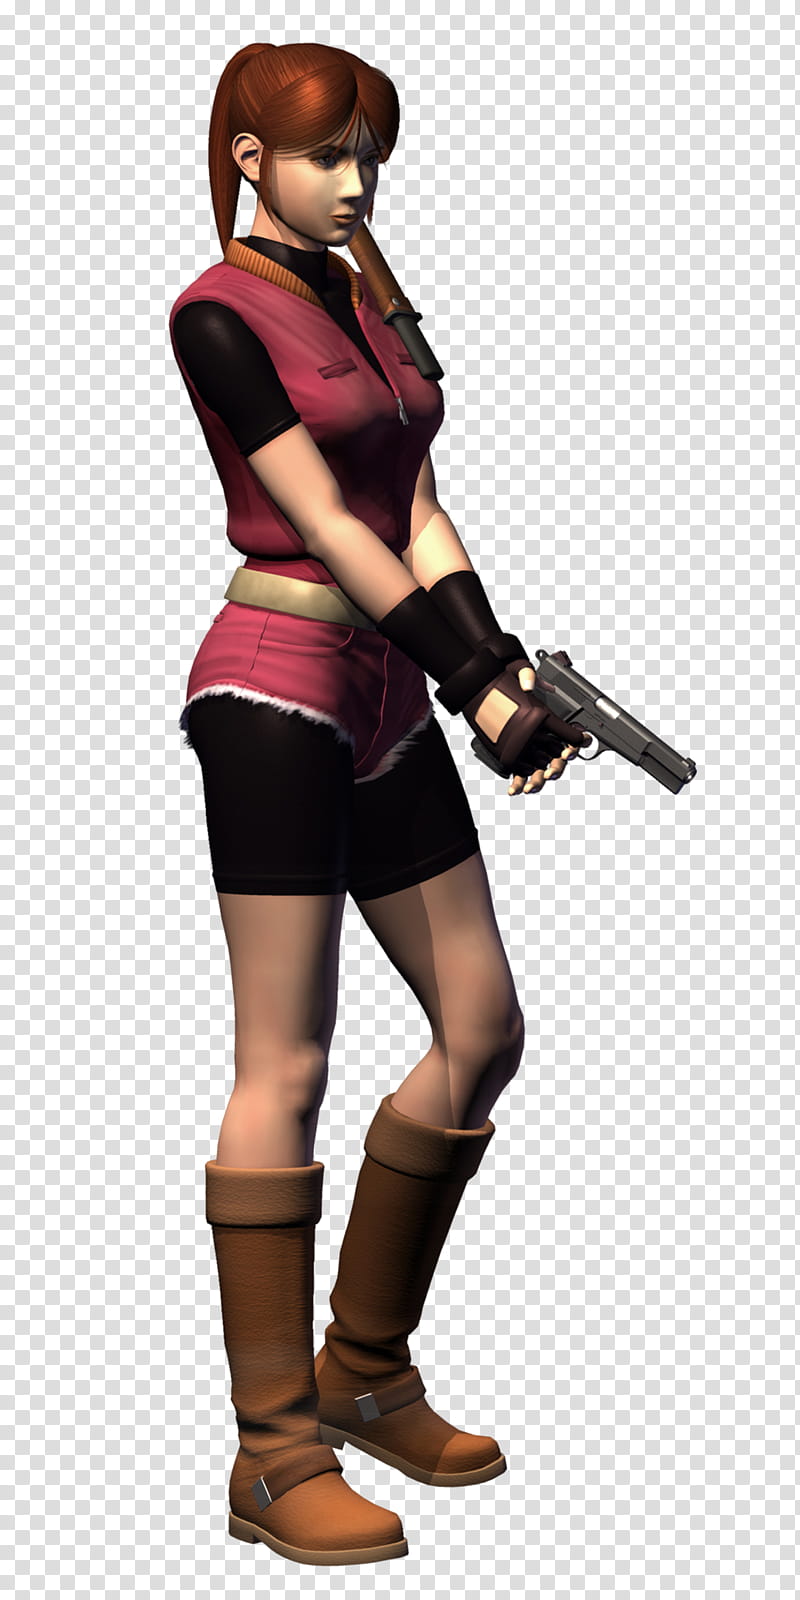 RE Claire Holding Gun Render, Claire Redfield holding pistol transparent background PNG clipart